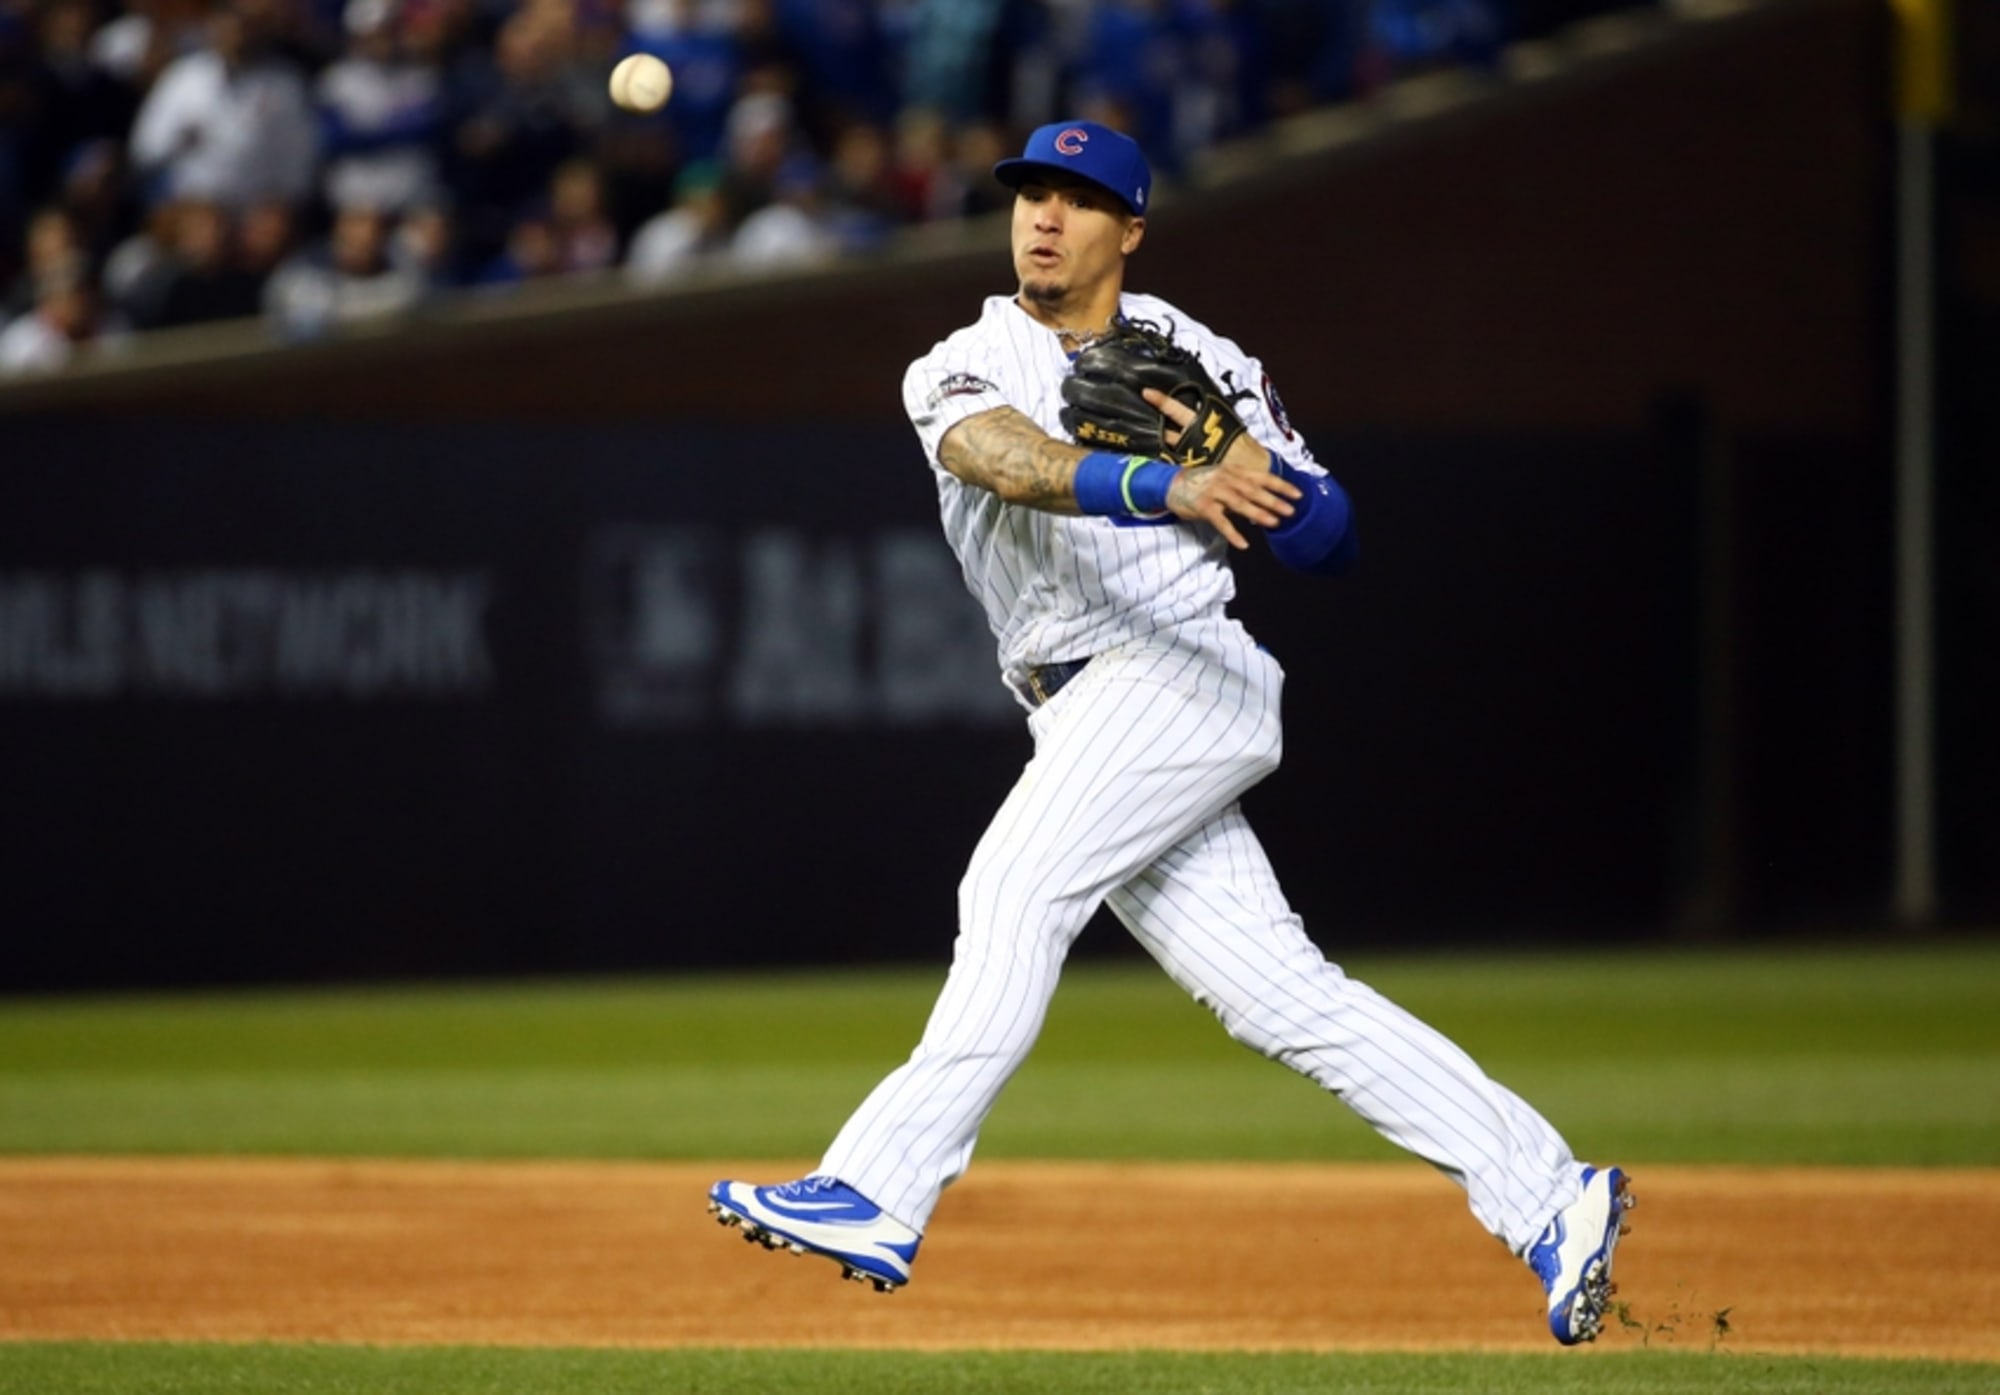 Chicago Cubs: Javier Baez continues to showcase potential in 2016